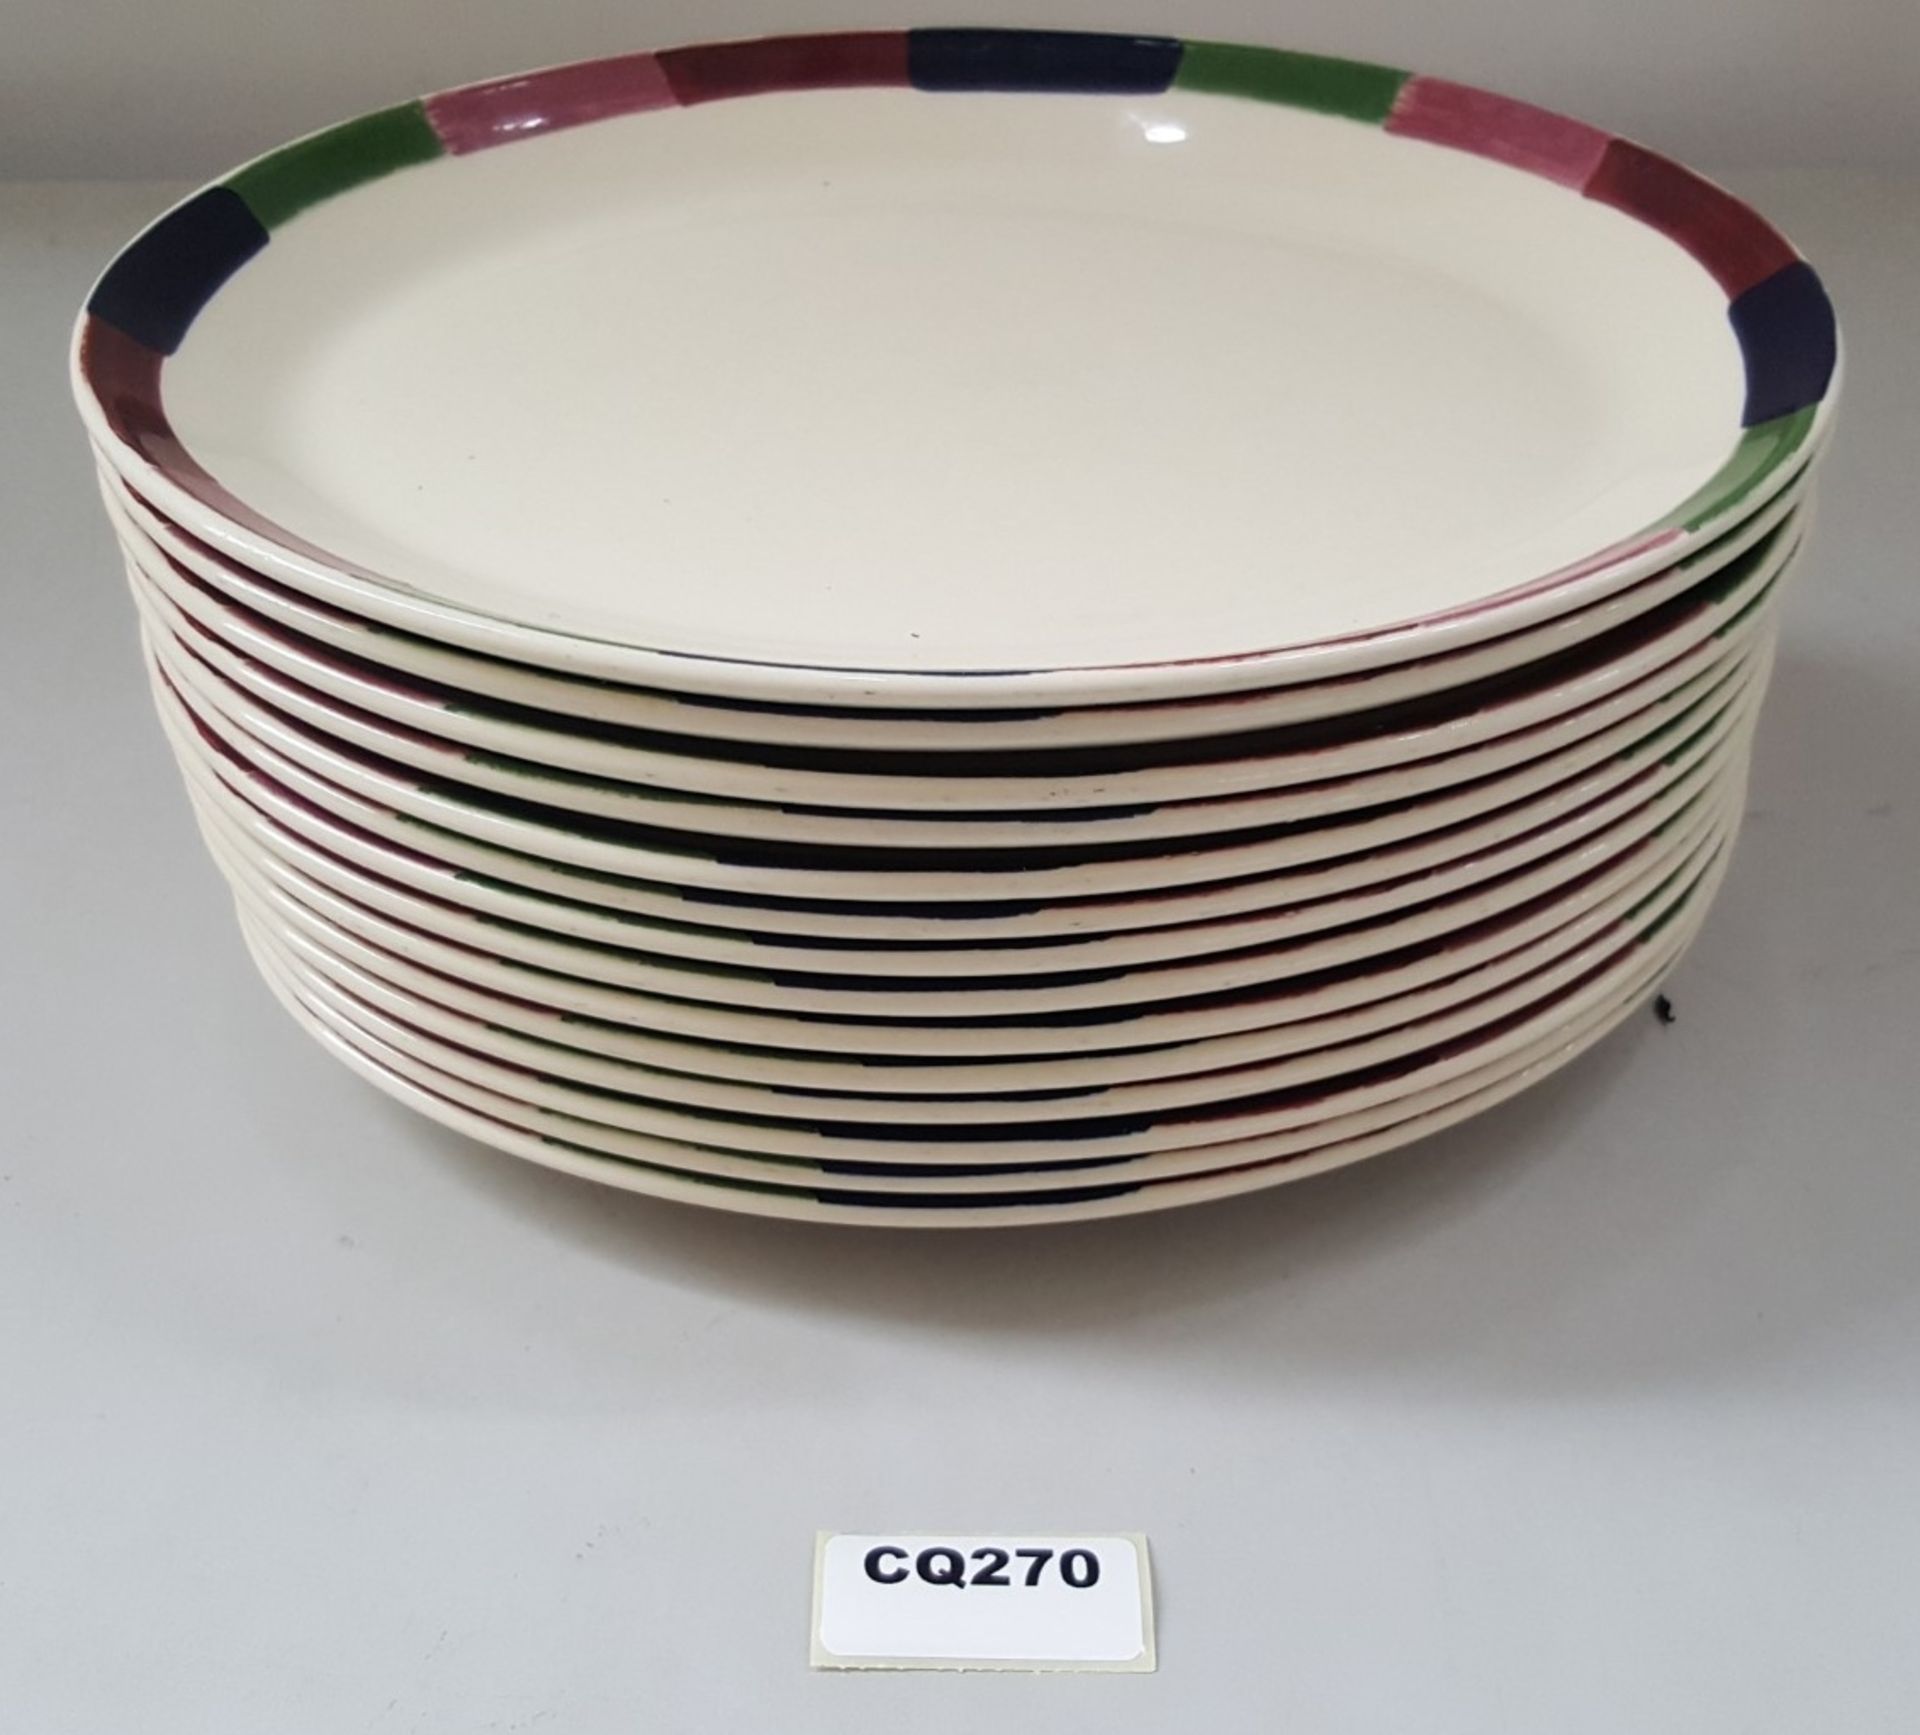 14 x Steelite Oval Serving Plates Cream With Patterned Edge L30/W23.5CM - Ref CQ270